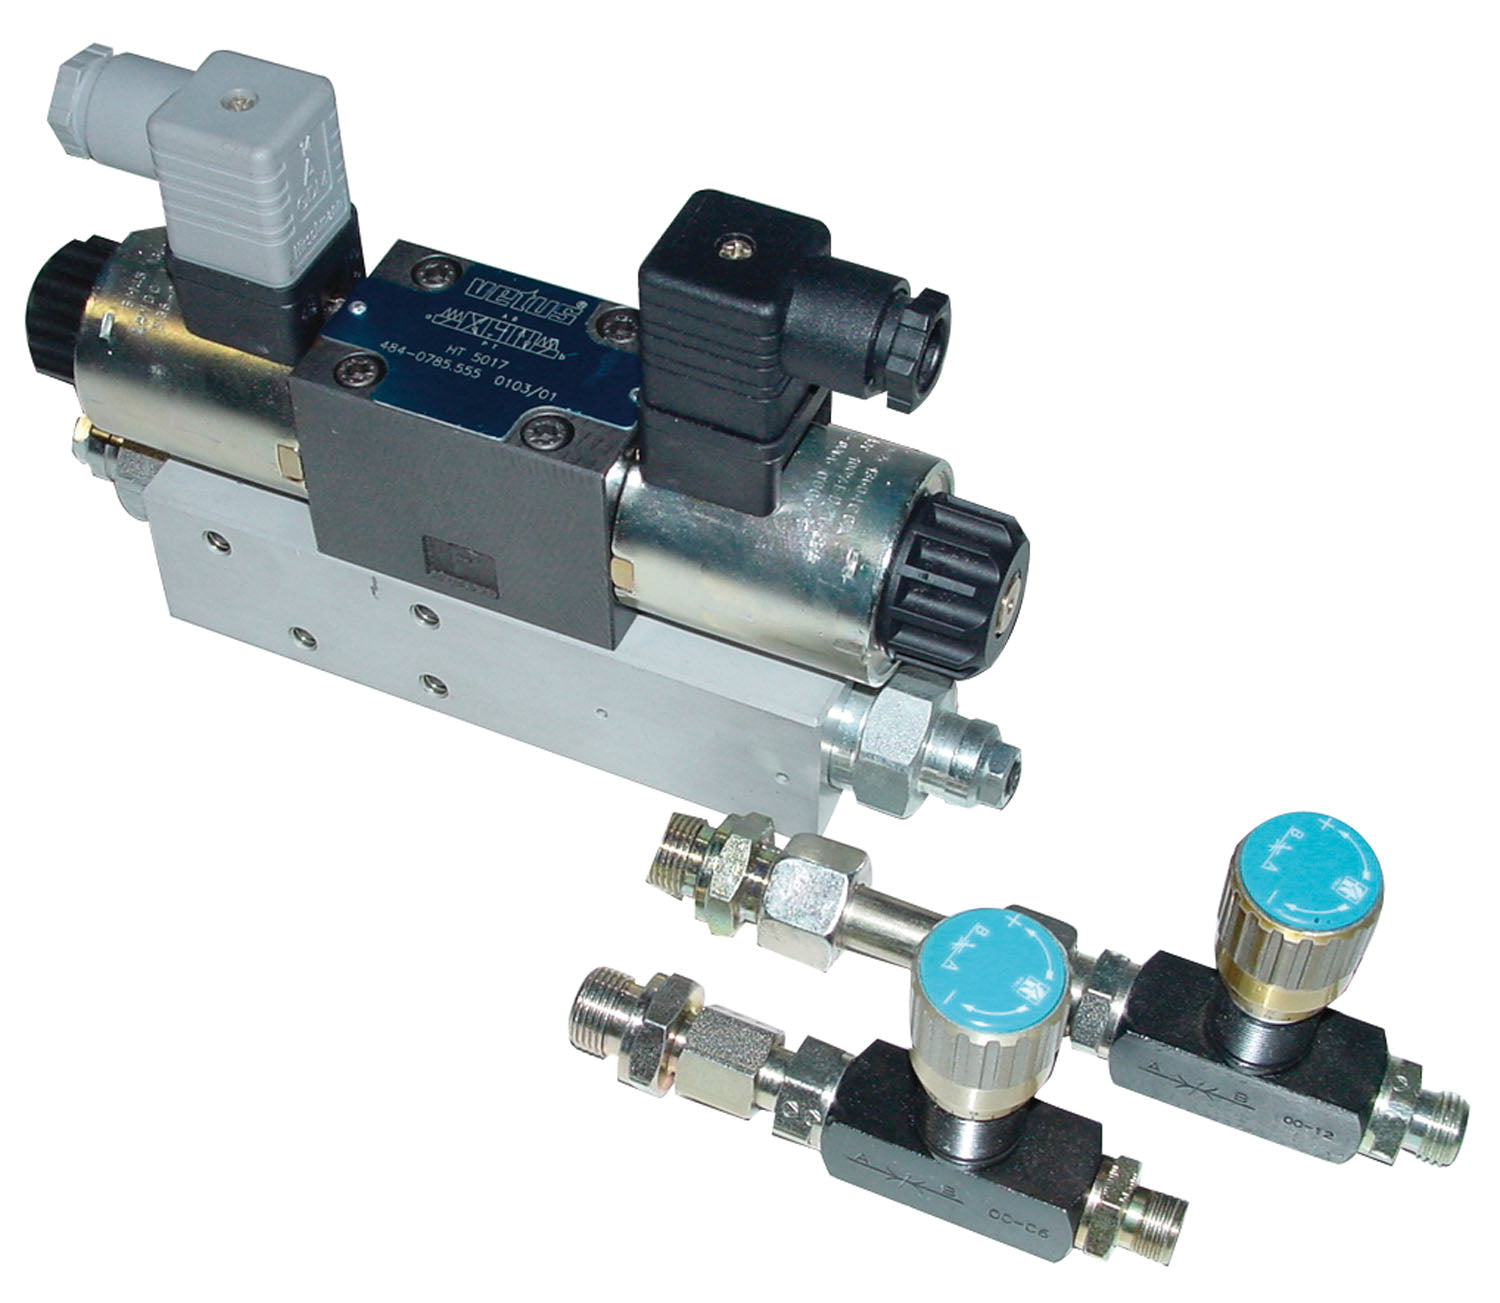 Vetus HT1014 - Directional control valve for mast lowering device